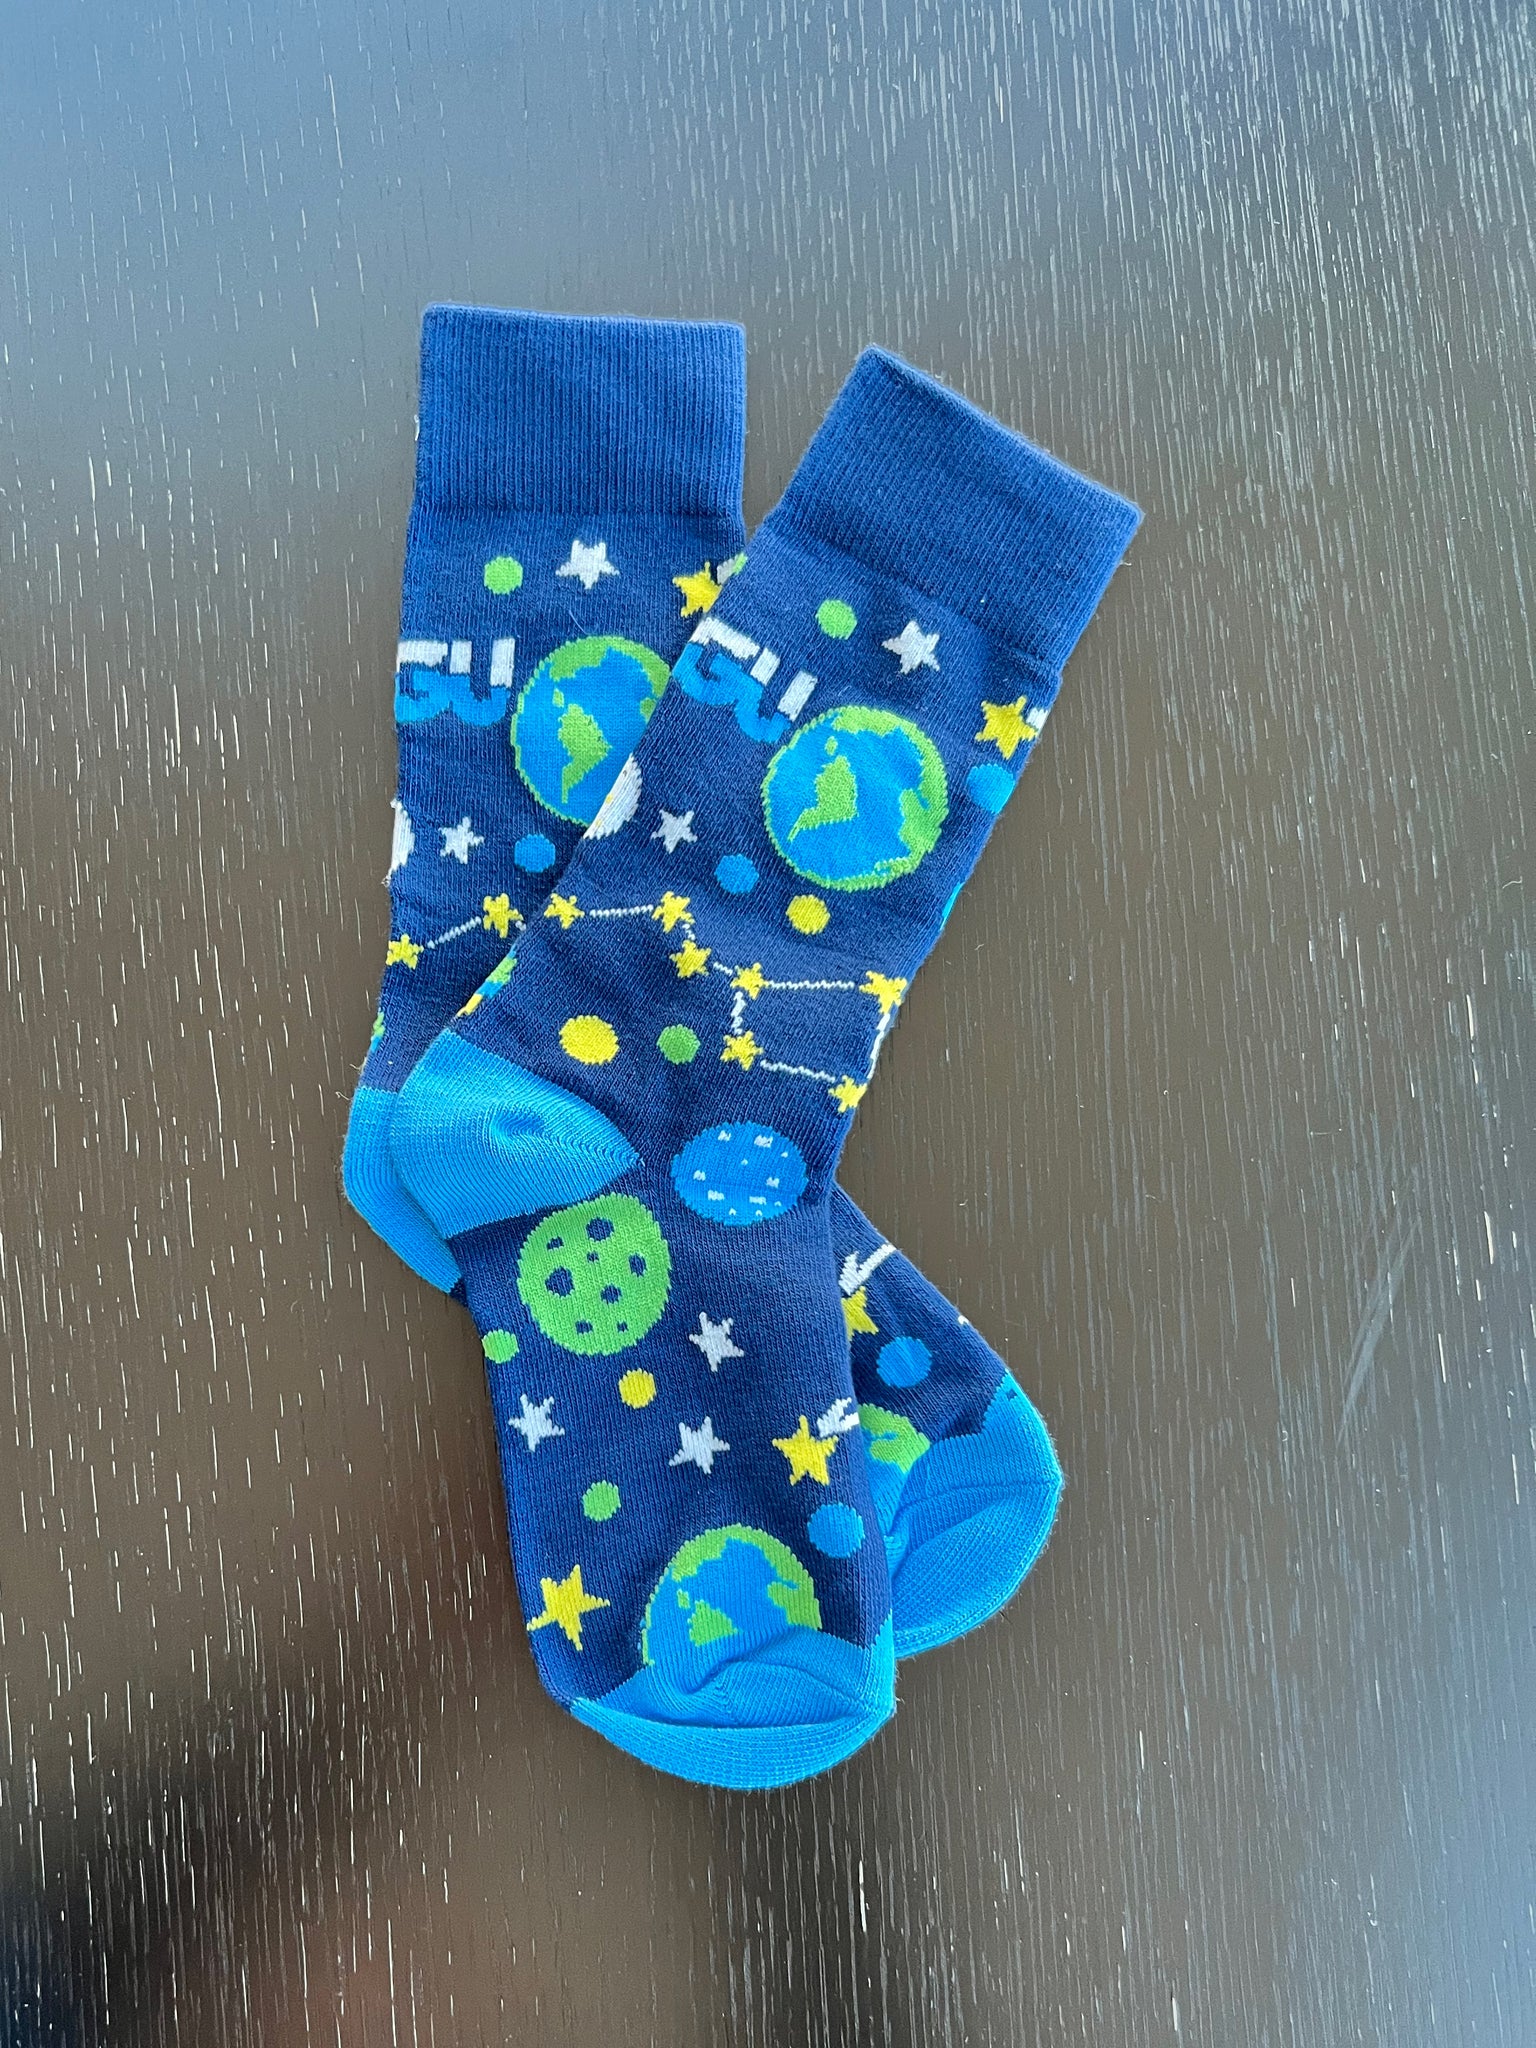 Pair of AGU socks in blue, green and yellow